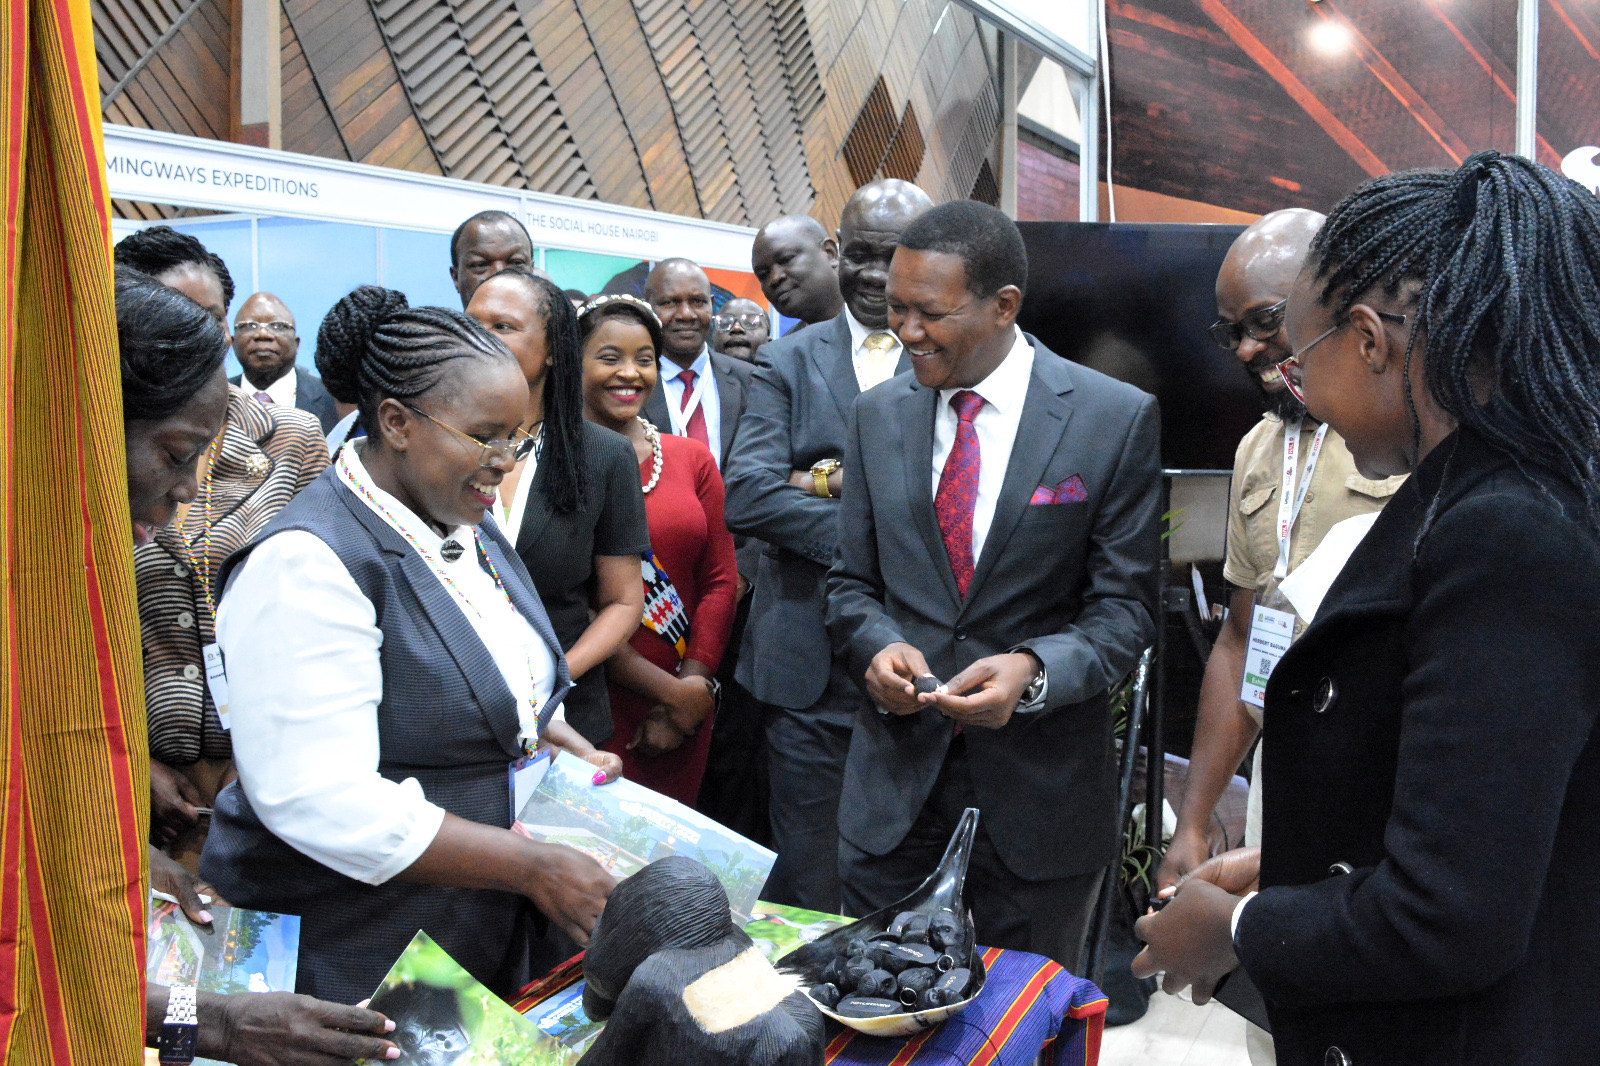 e Cabinet Secretary for Tourism and Wildlife-Kenya, Dr. Alfred Mutua (3rd from right), visiting one of the exhibitors' stalls, accompanied by the Cabinet Secretary for East African Community, the ASALs and Regional Development-Kenya, Hon. Peninah Malonza (white blouse), and other dignitaries, at the official opening of the 3rd East African Regional Tourism Expo and Magical Kenya Travel Expo, at the Kenyatta International Convention Centre.